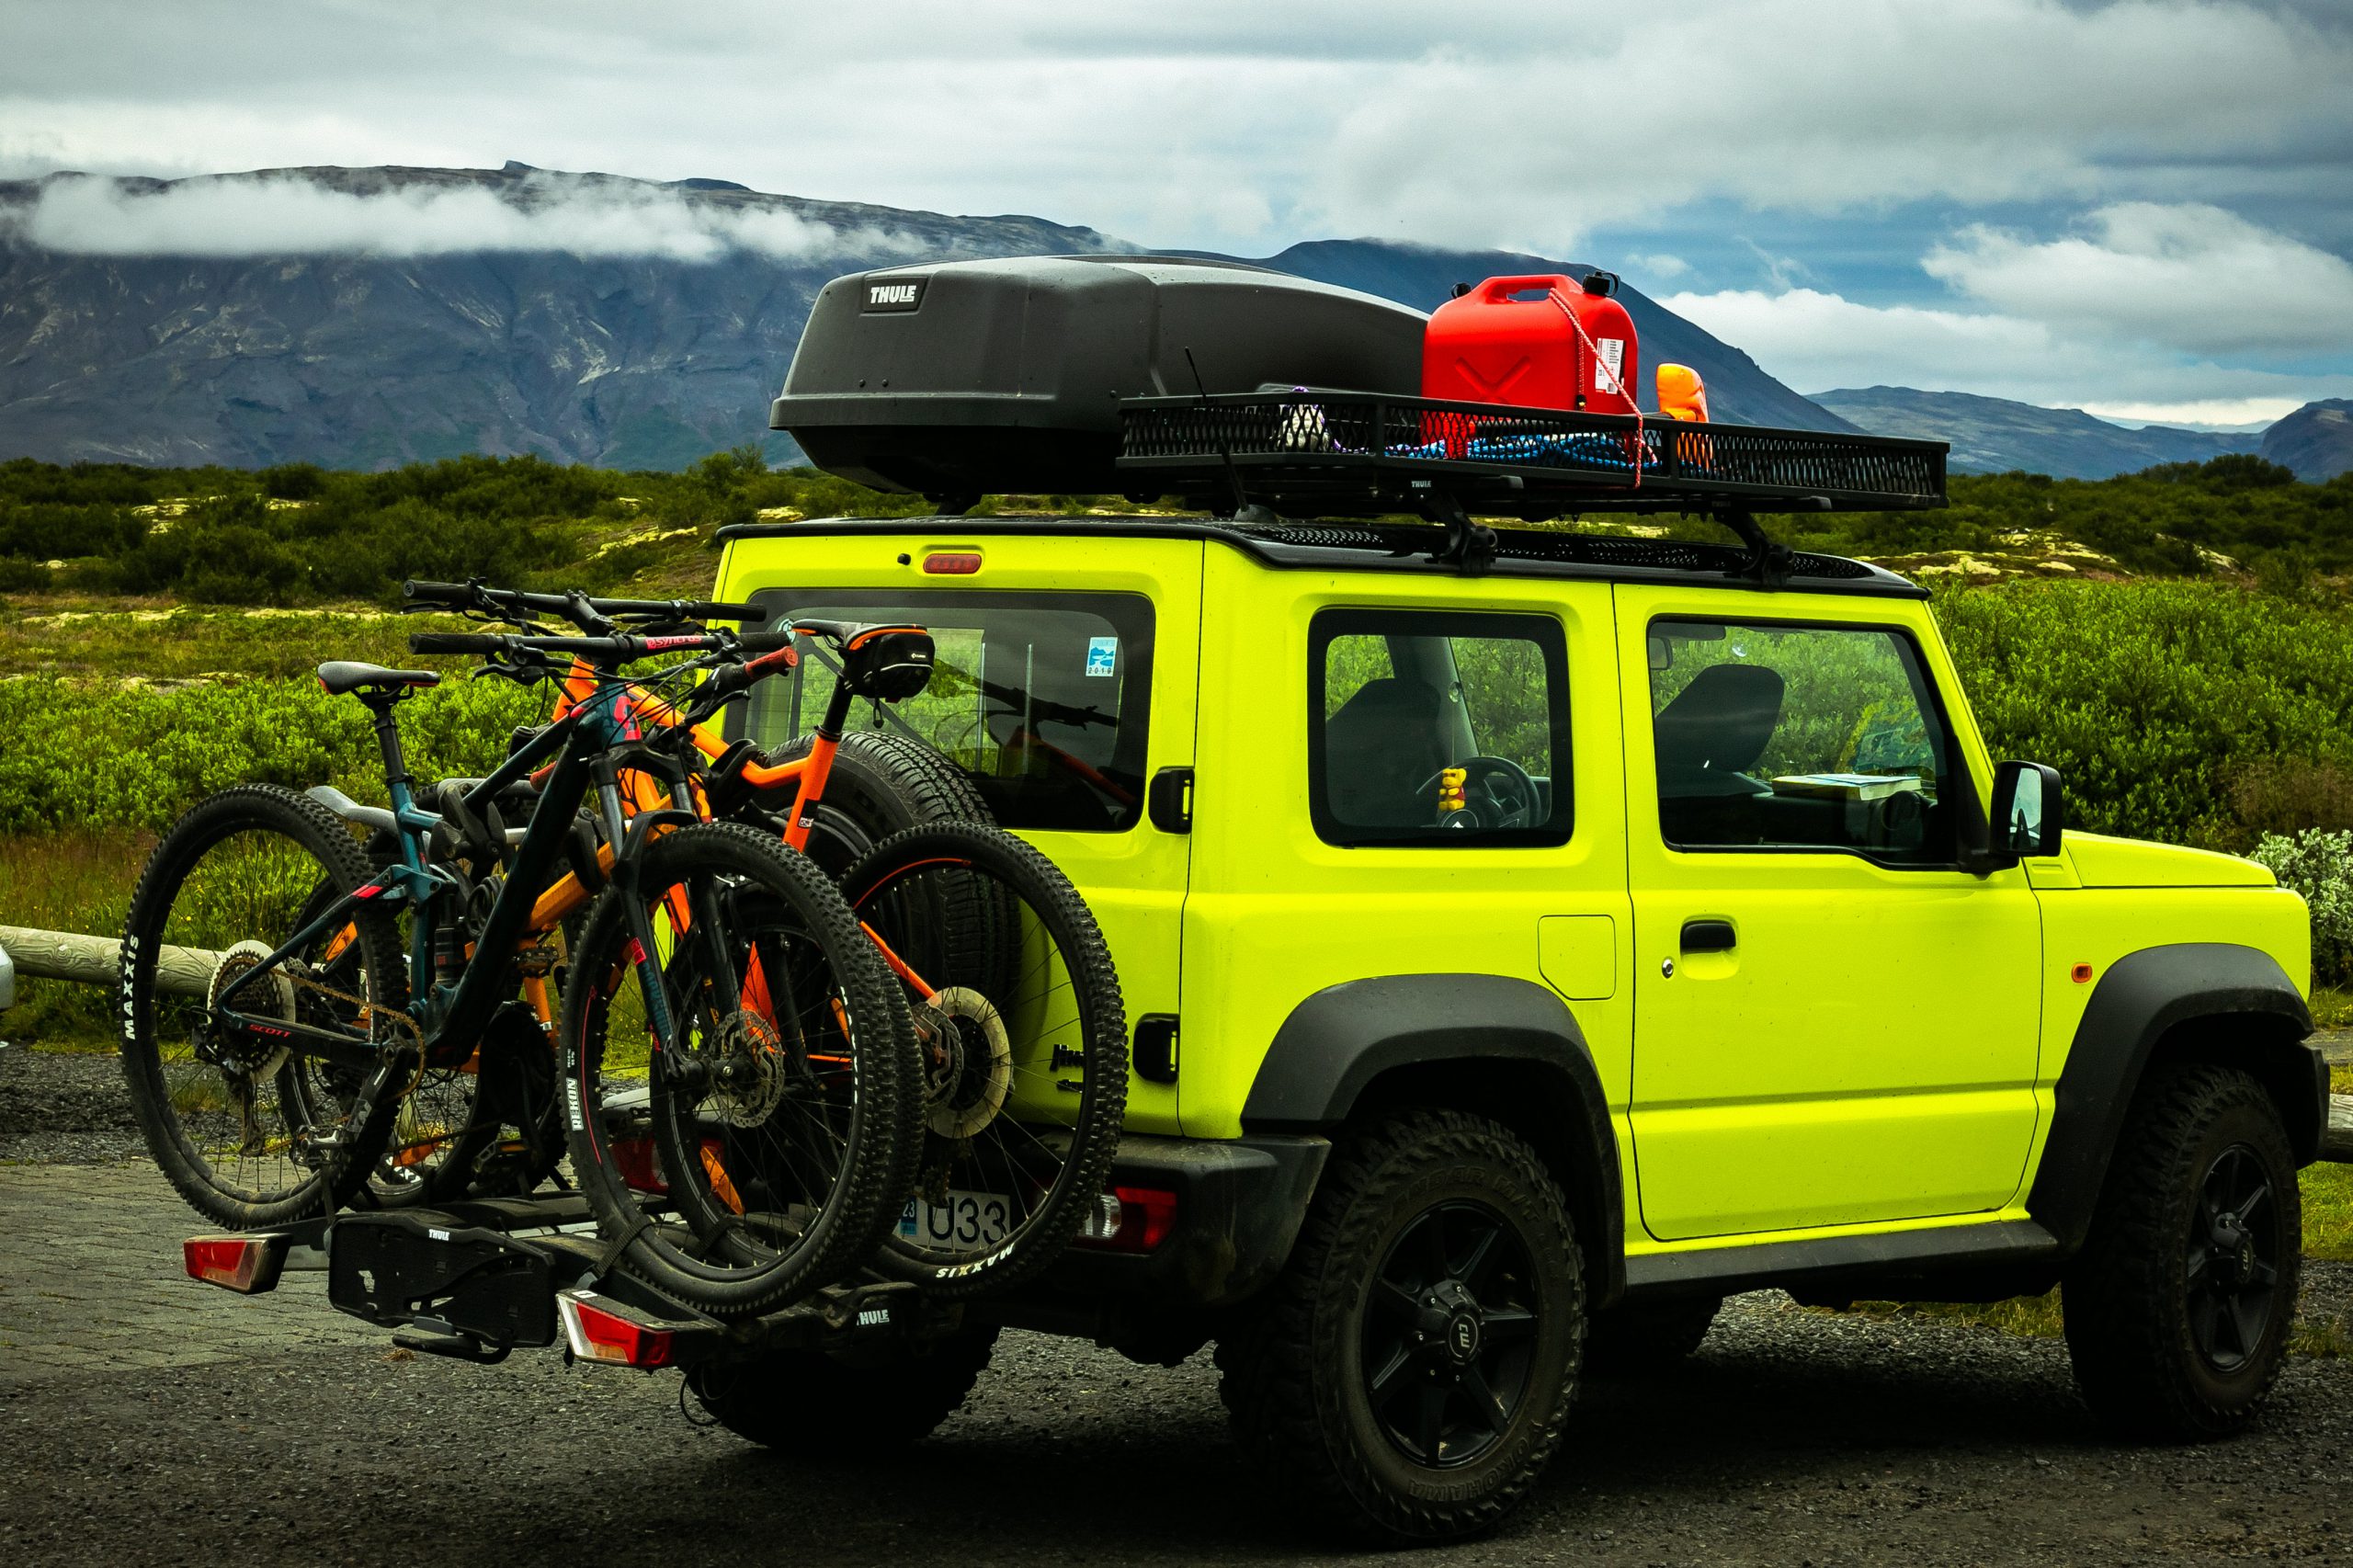 Yellow-ish green 4x4 with roof rack and bike rack attached. Luggage container and red box on roof rack and two bikes on bike rack. Greenery and mountains in the background.